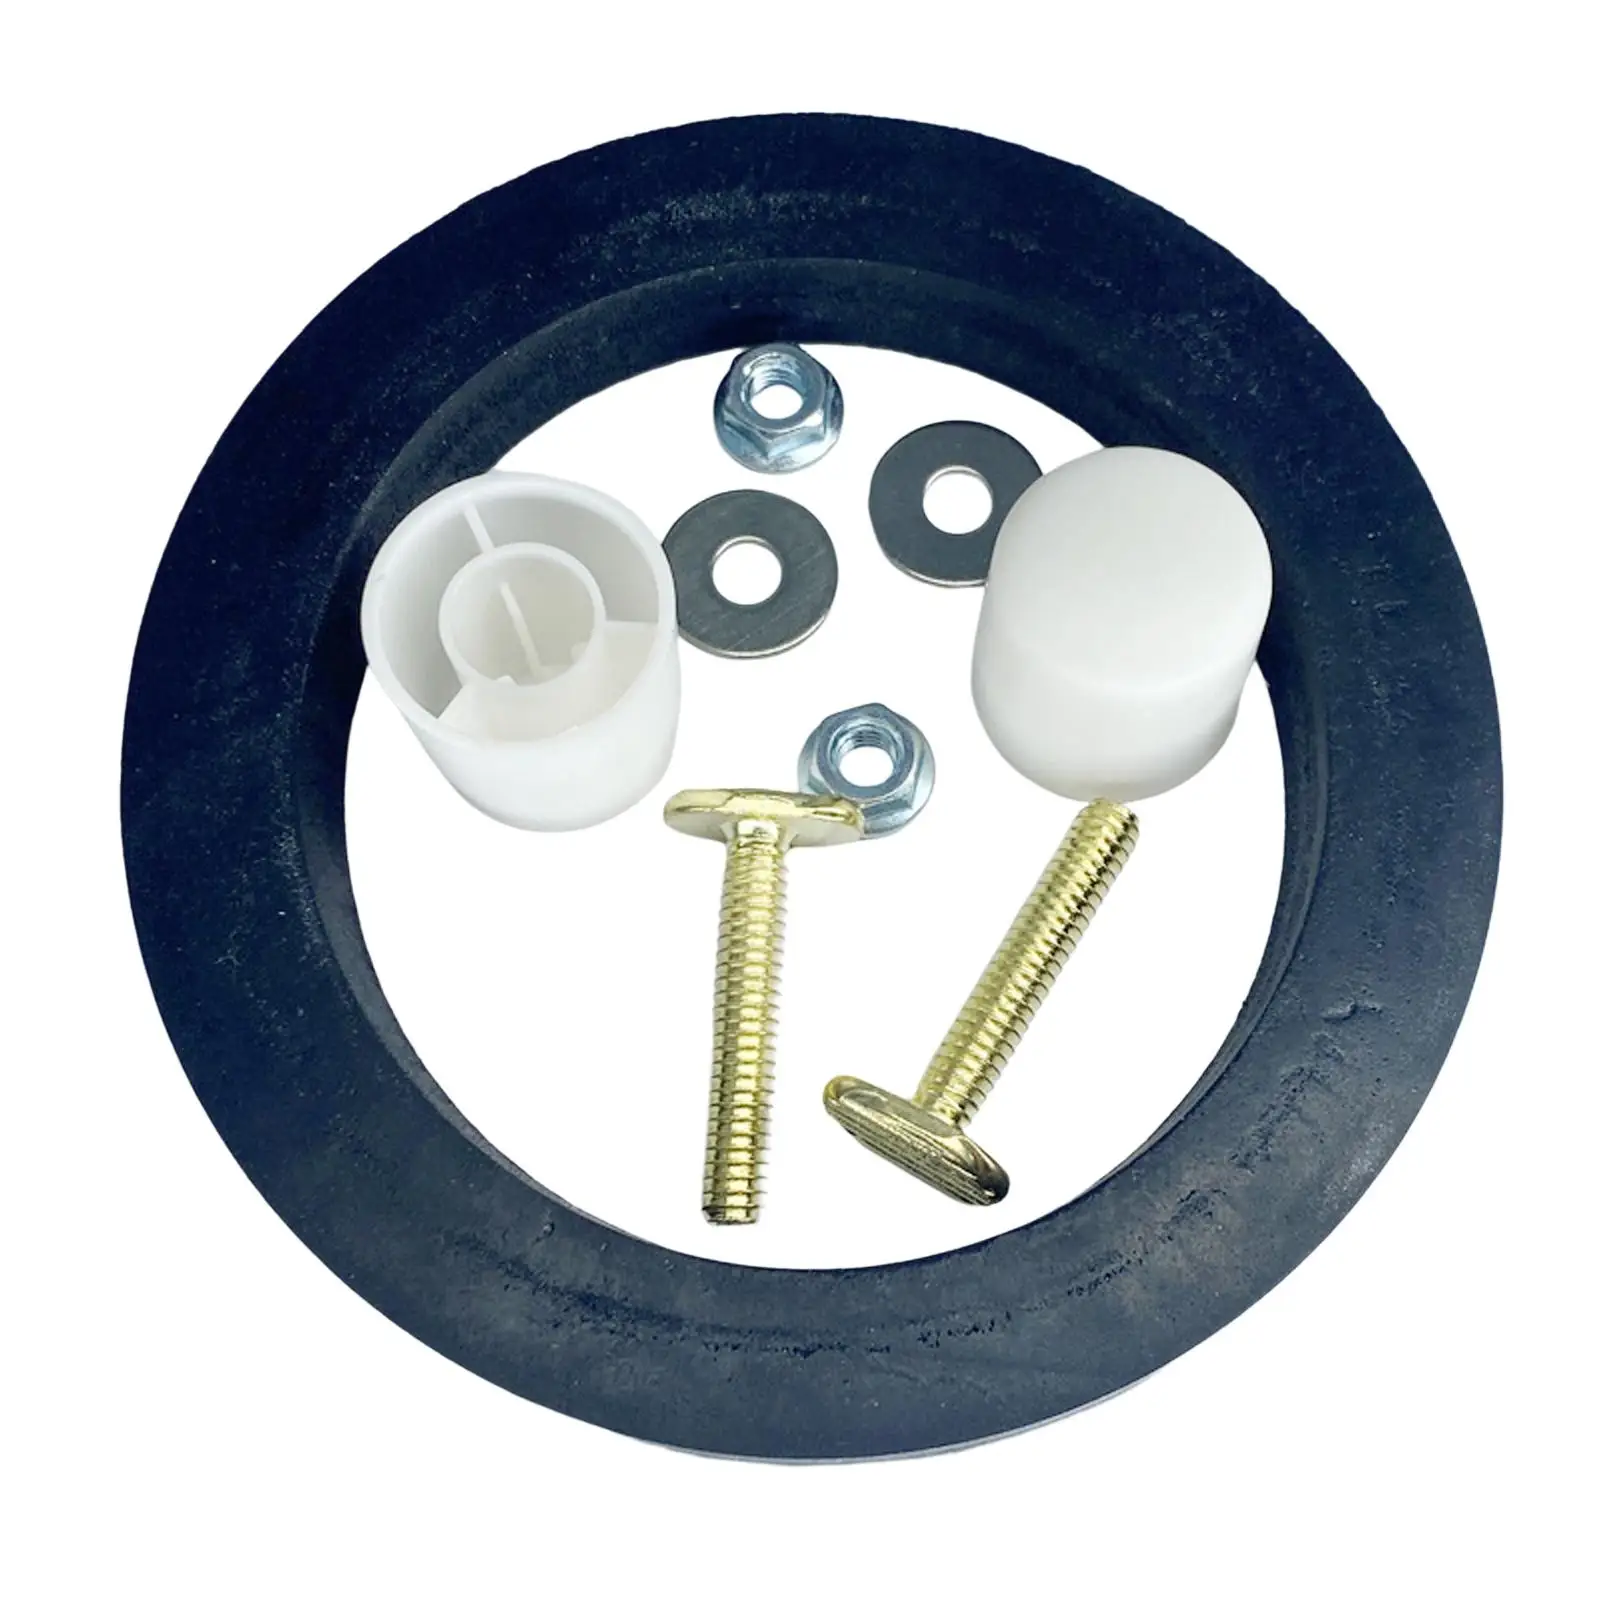 

Seal Gasket of RV Toilet for Toilet Simple Installation Flush Ball Seal Accessories Professional Durable Sturdy